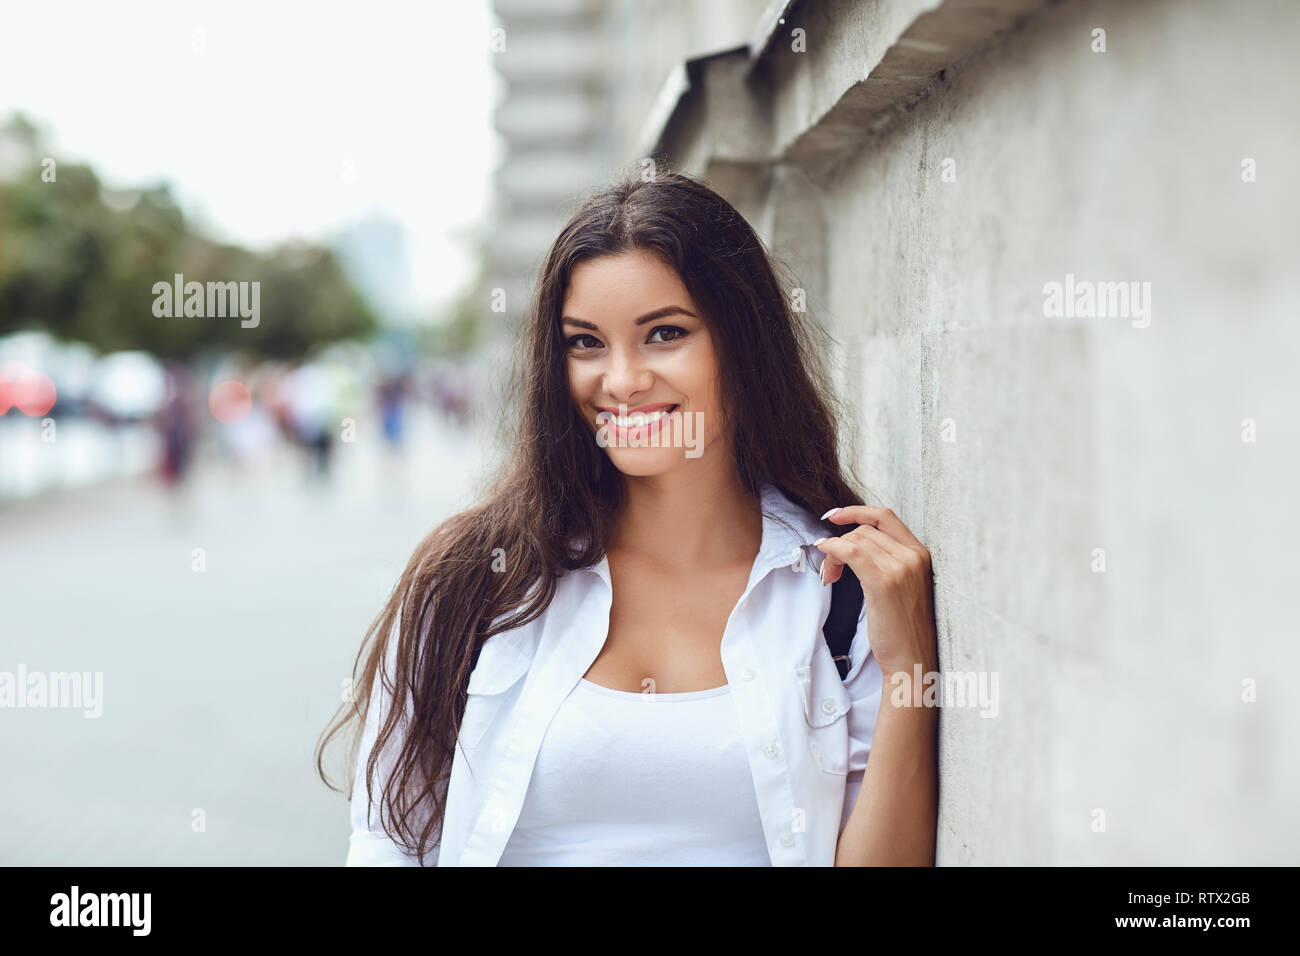 Beautiful happy brunette woman smiling outdoors.  Stock Photo